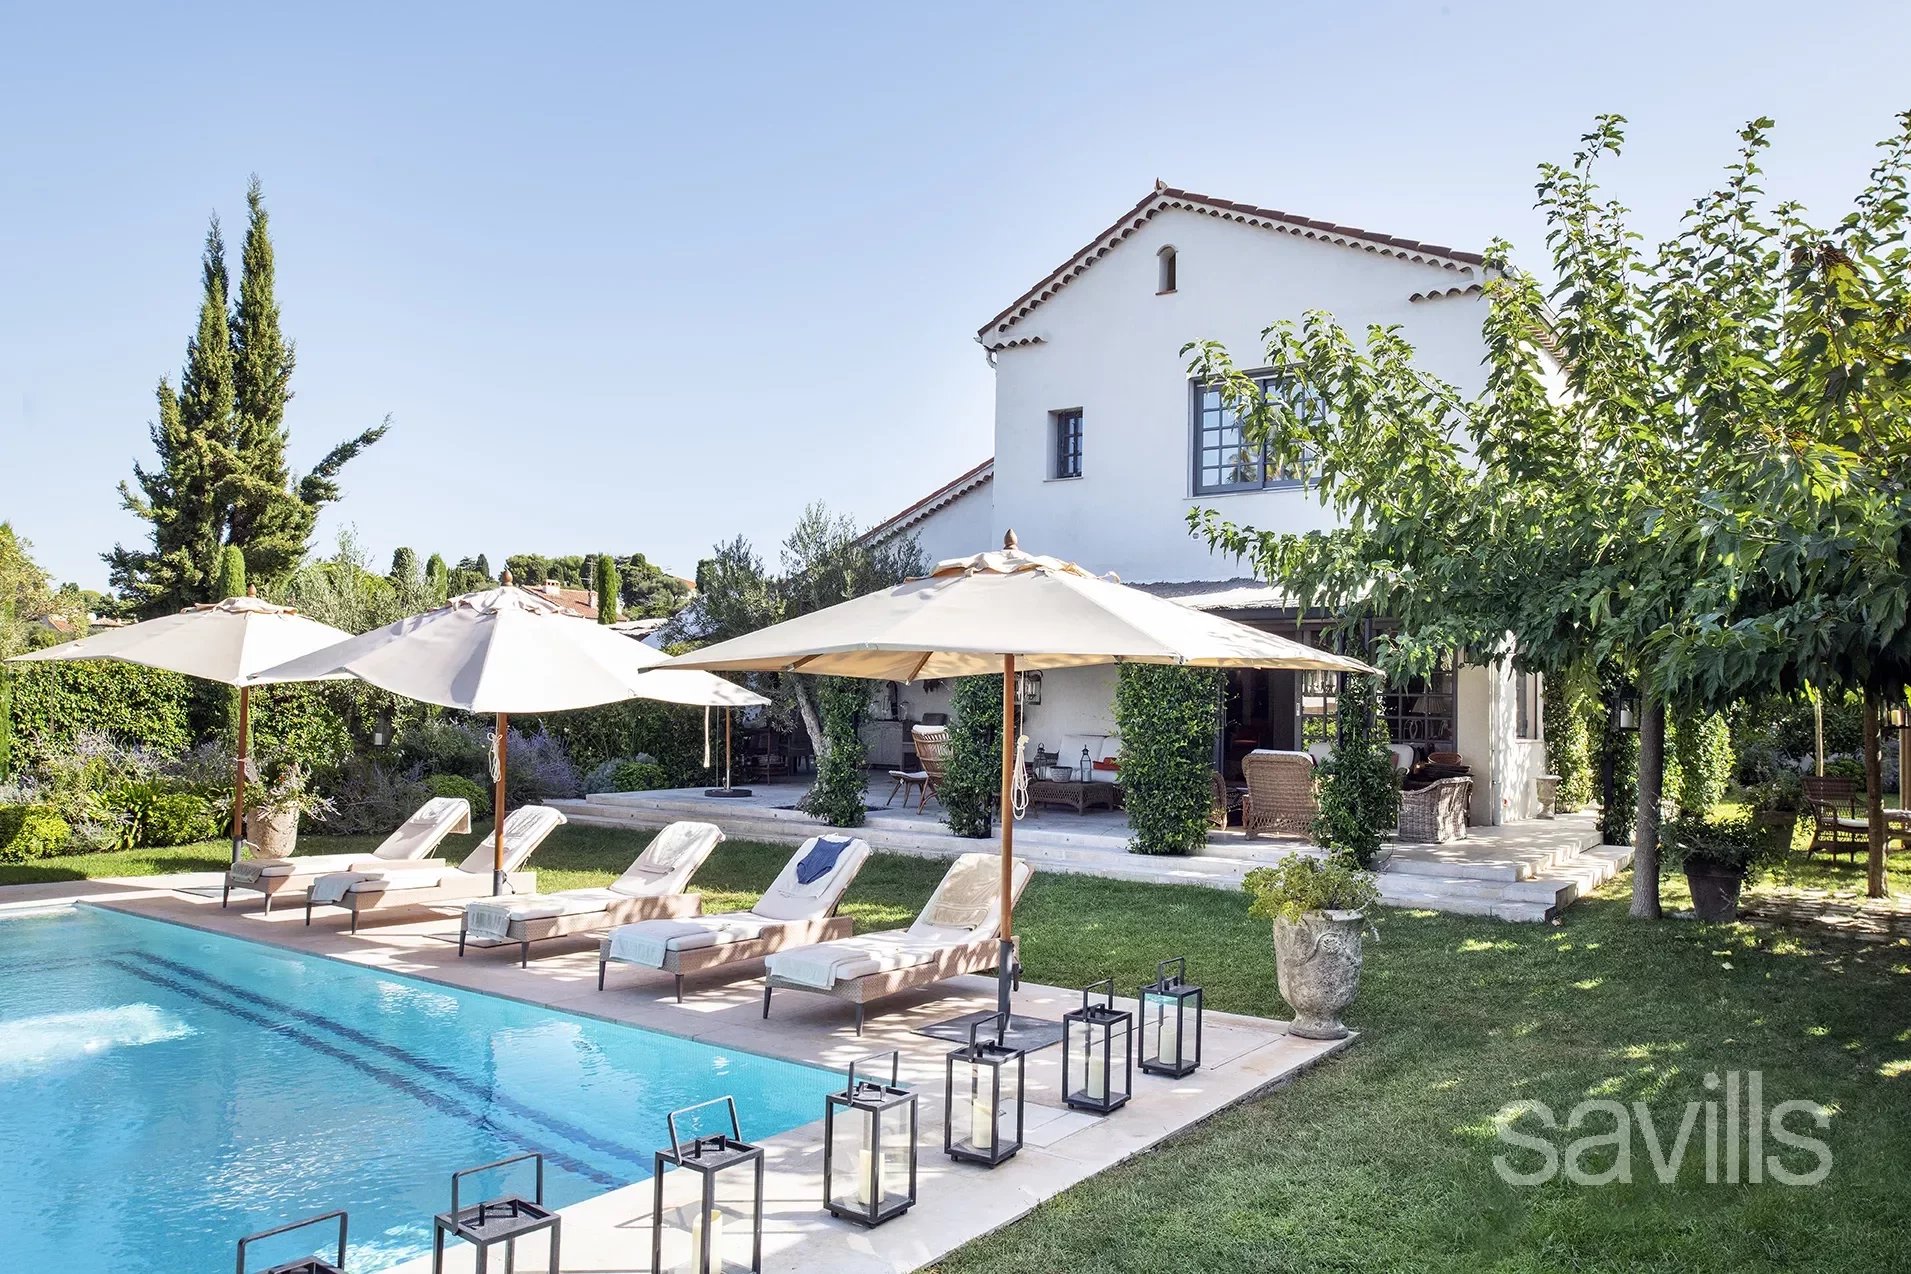 A charming villa with an independent bedroom